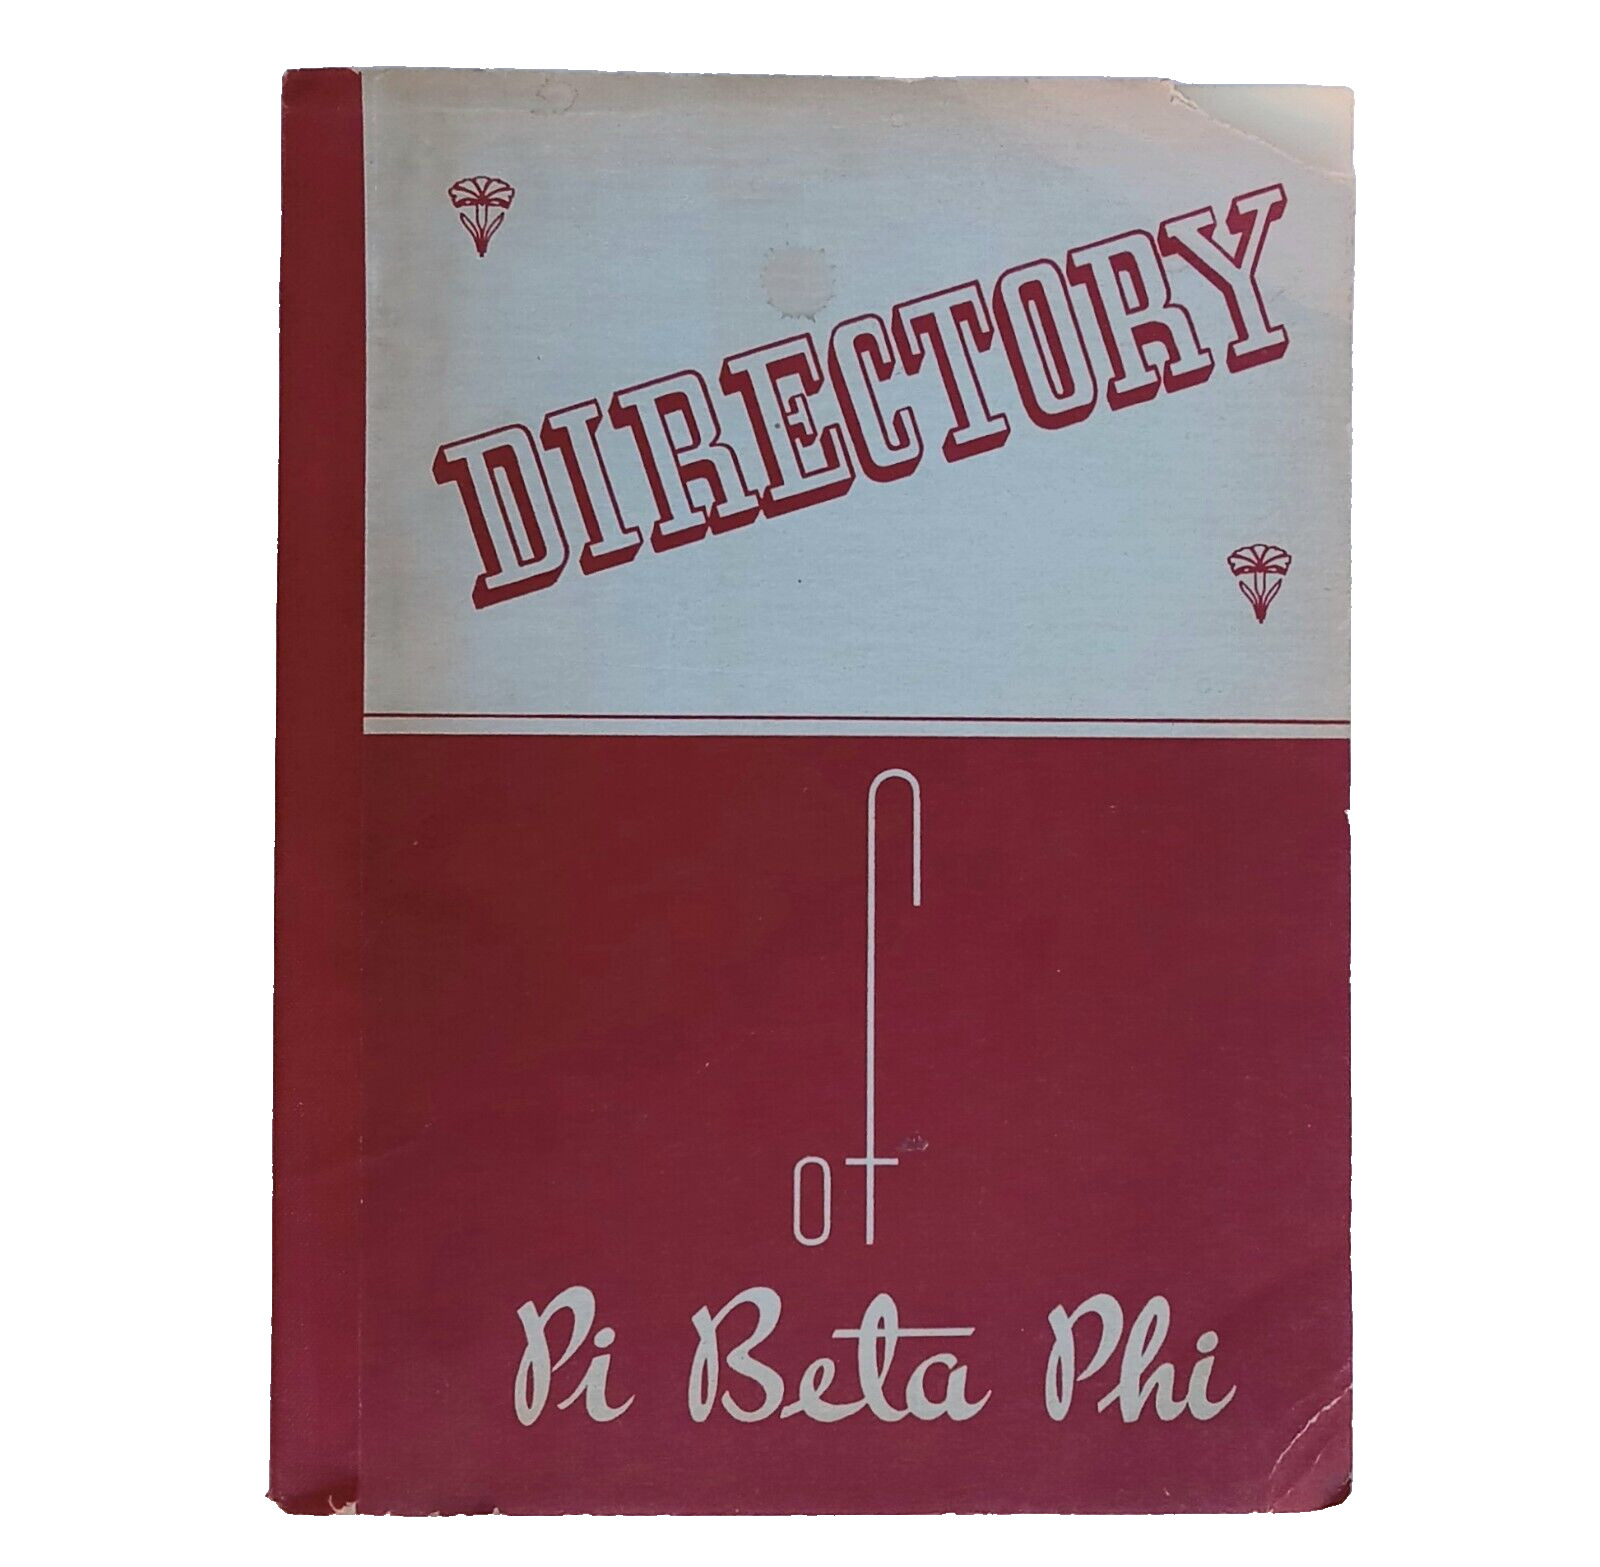 1940s 50s PI BETA PHI DIRECTORY vintage BOOK Fraternity Sorority 800pgs +BOOK